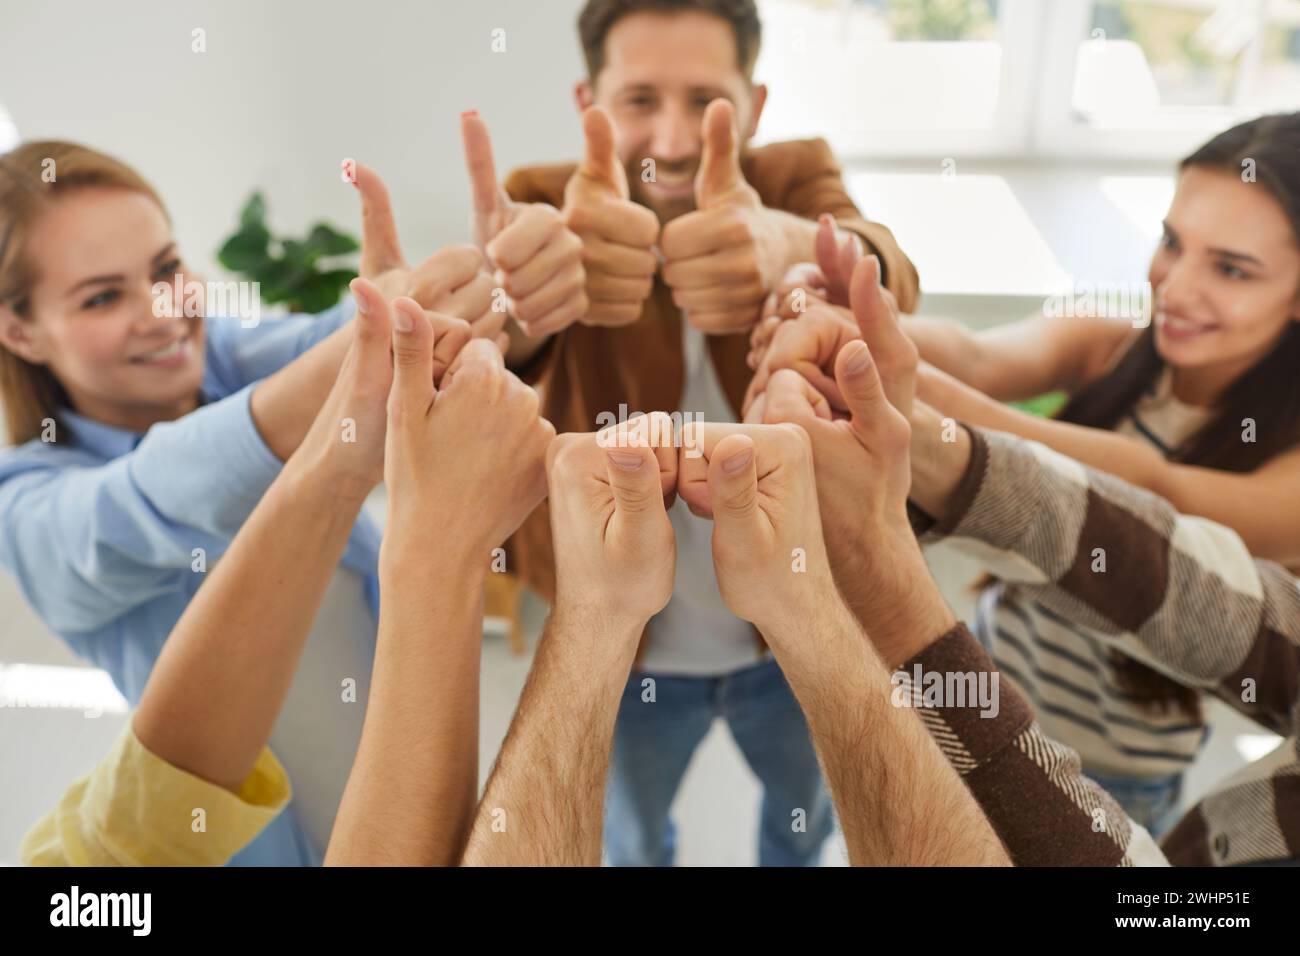 Happy smiling people friends putting their arms together in a circle showing thumb up sign. Stock Photo